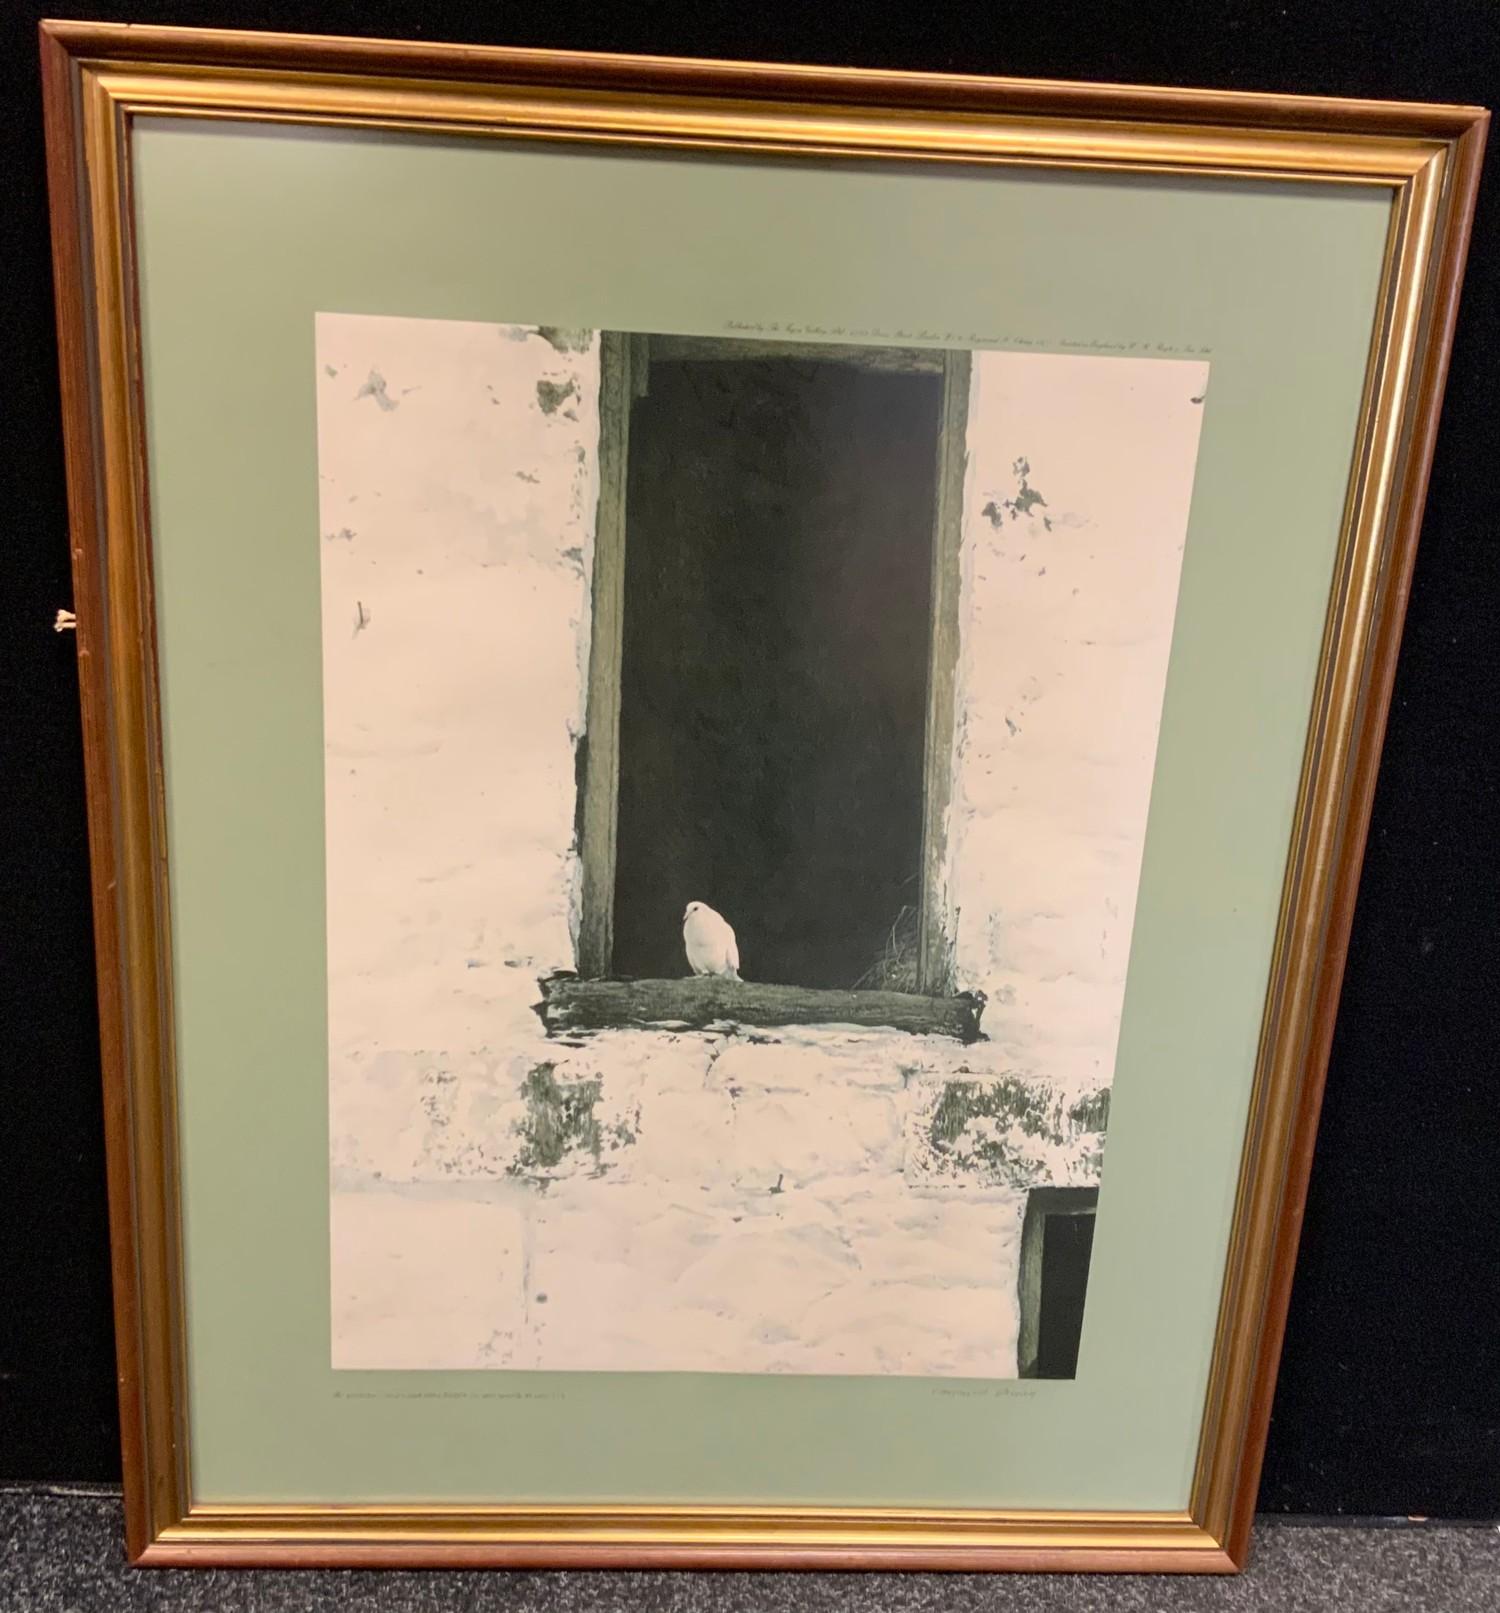 Raymond H Ching (B1939), by and after, Dove in a Window, signed limited edition, 274/500, dated